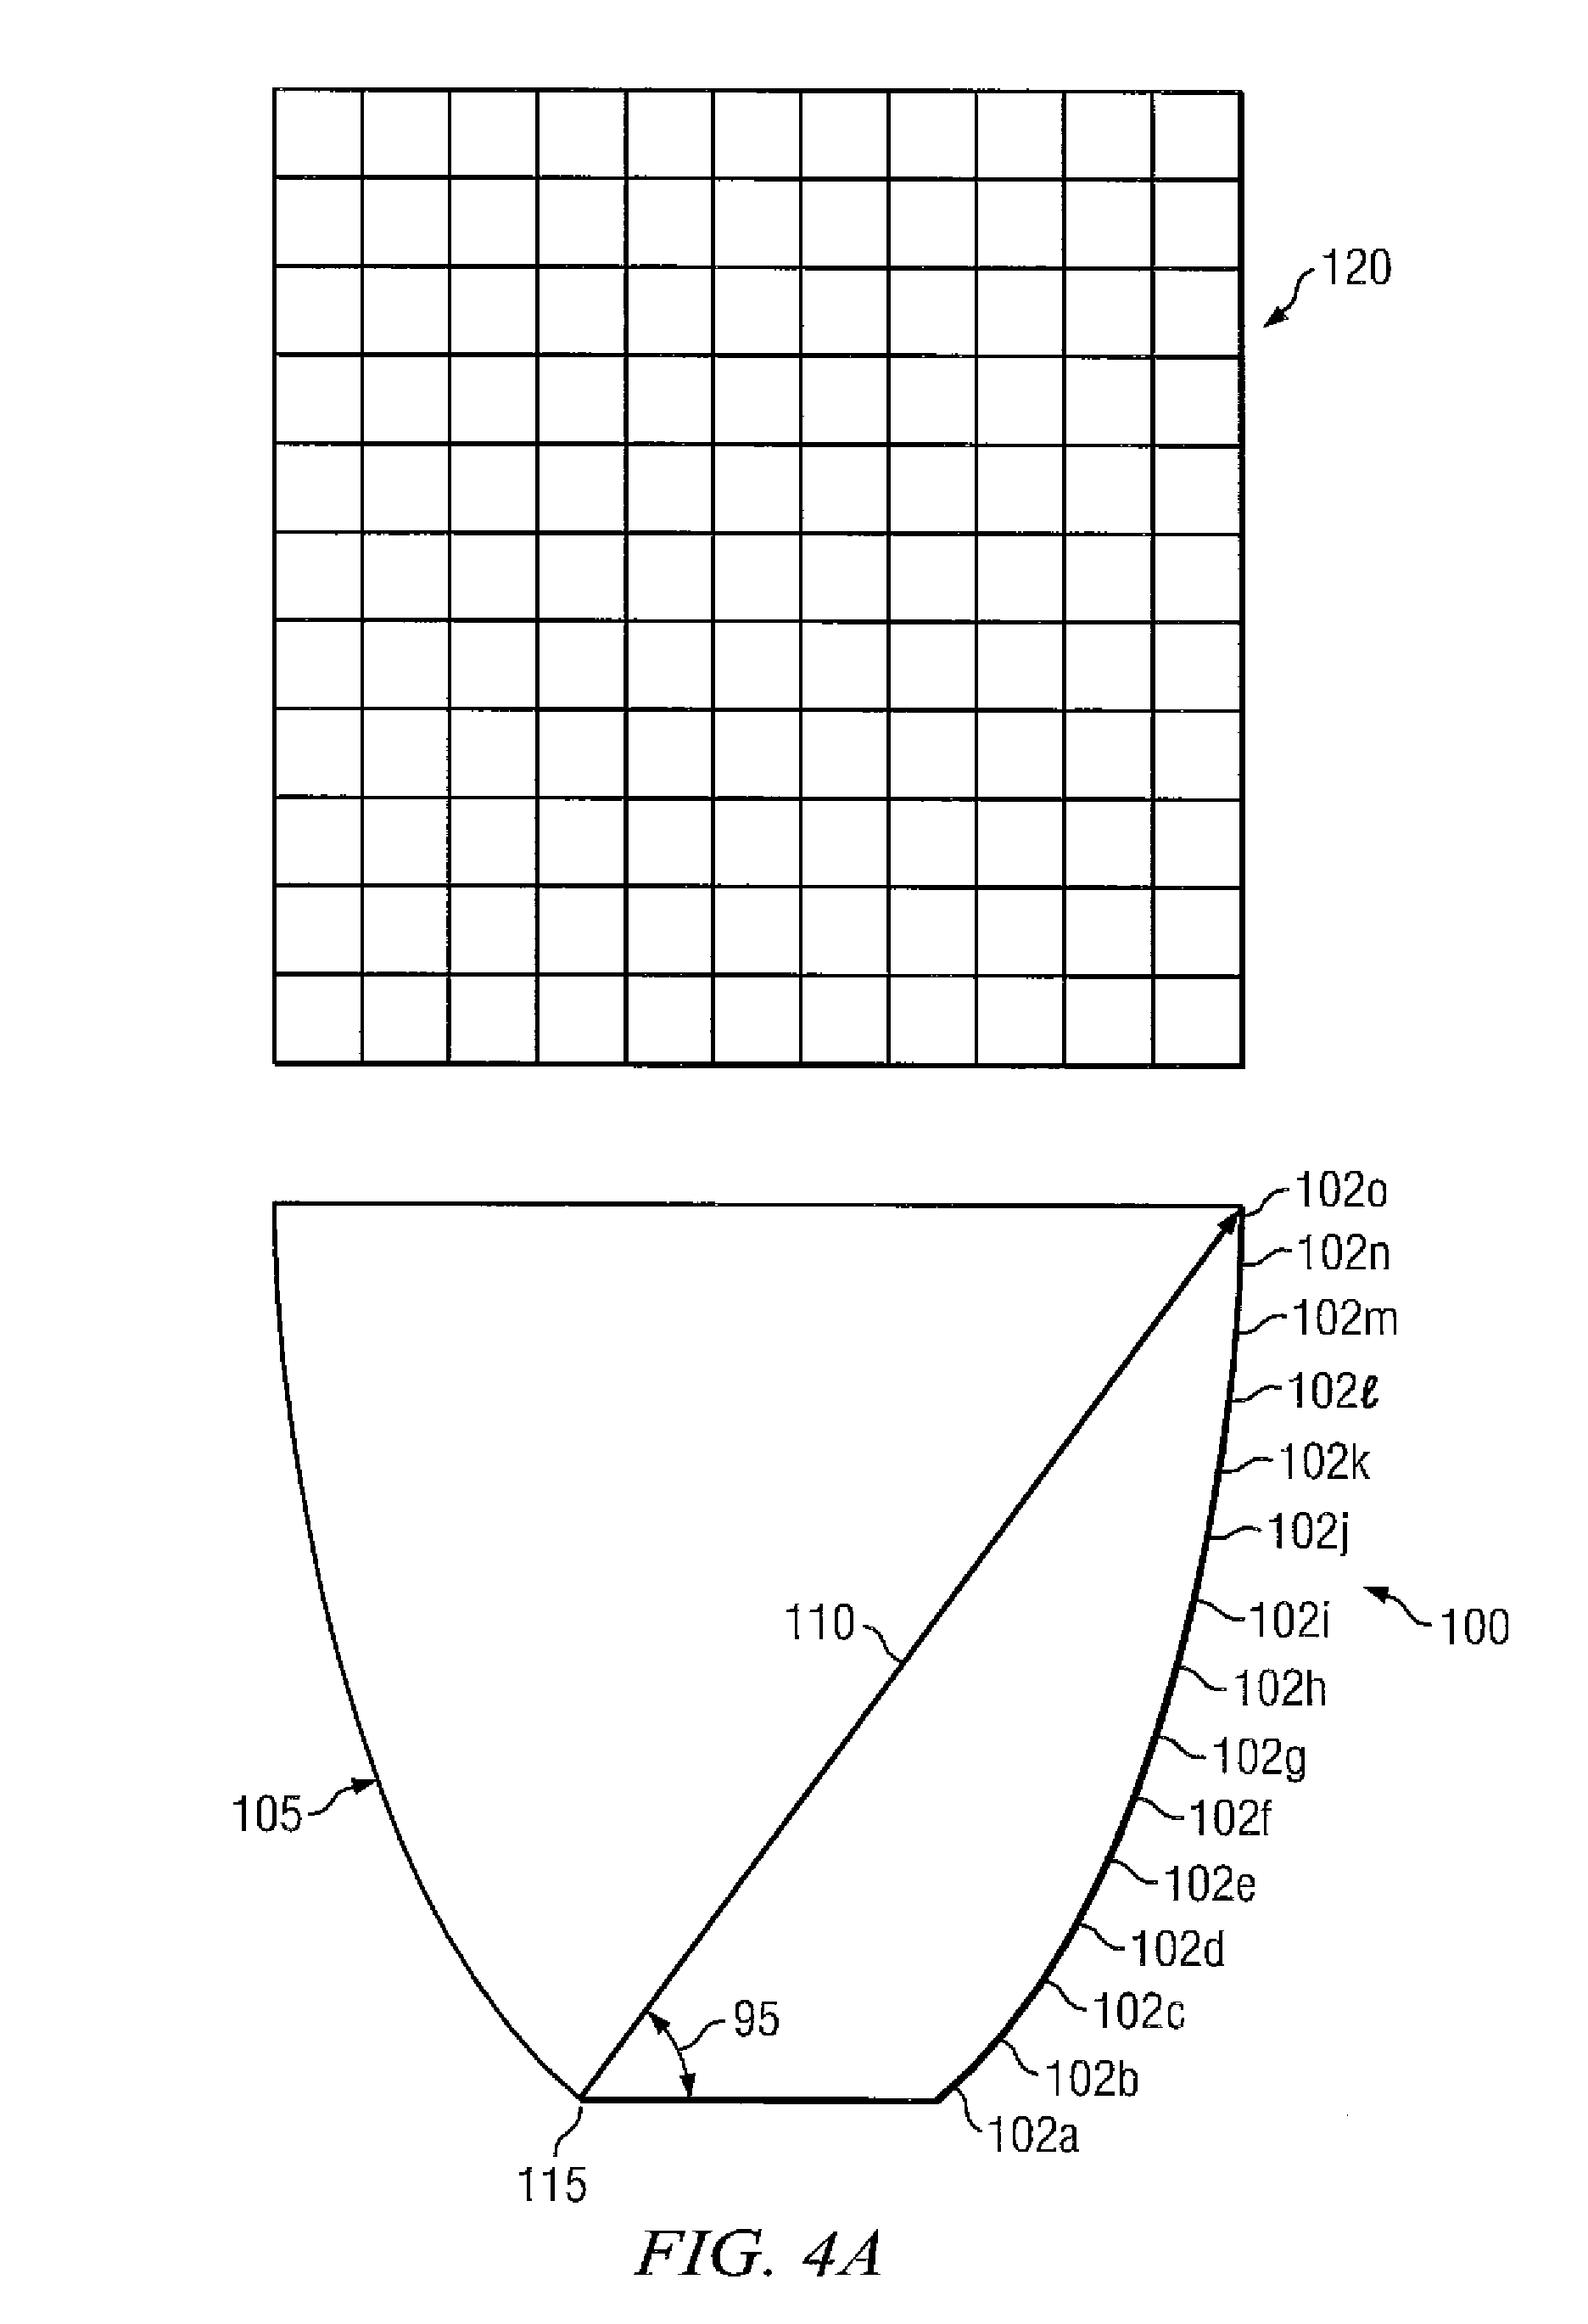 Separate optical device for directing light from an LED